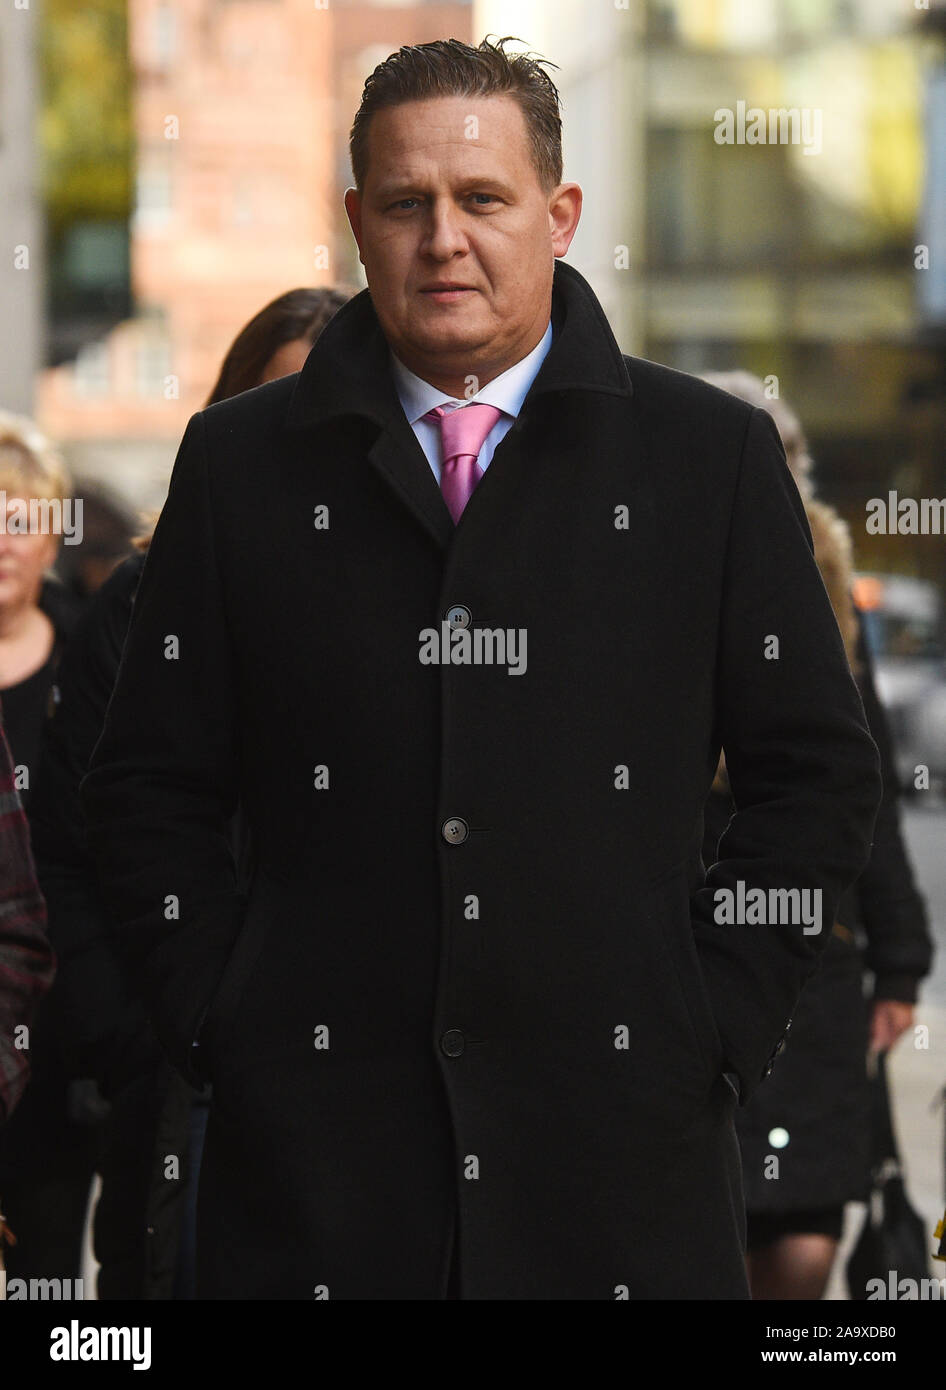 Jodie Chesney's uncle Peter (no surname given) arrives at the Old Bailey in London, where two teenagers, Svenson Ong-a-Kwie, 19, and a 17-year-old boy, were found guilty of her murder. Stock Photo